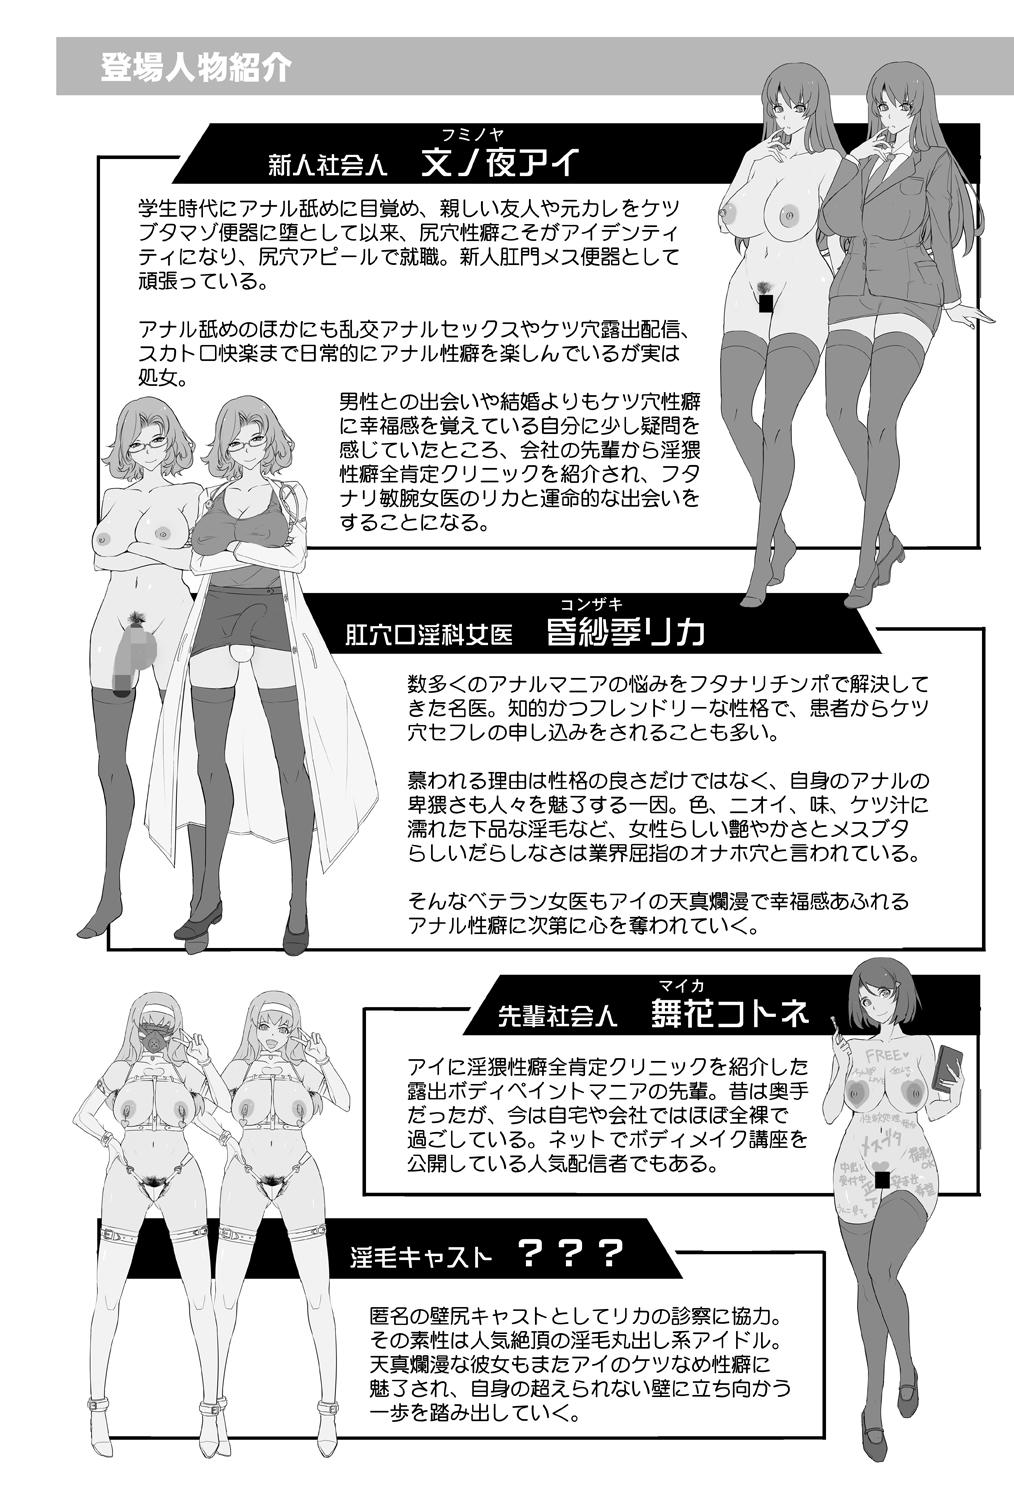 Spying 淫猥性癖全肯定クリニック 肛穴口淫科 - Original Transexual - Page 4